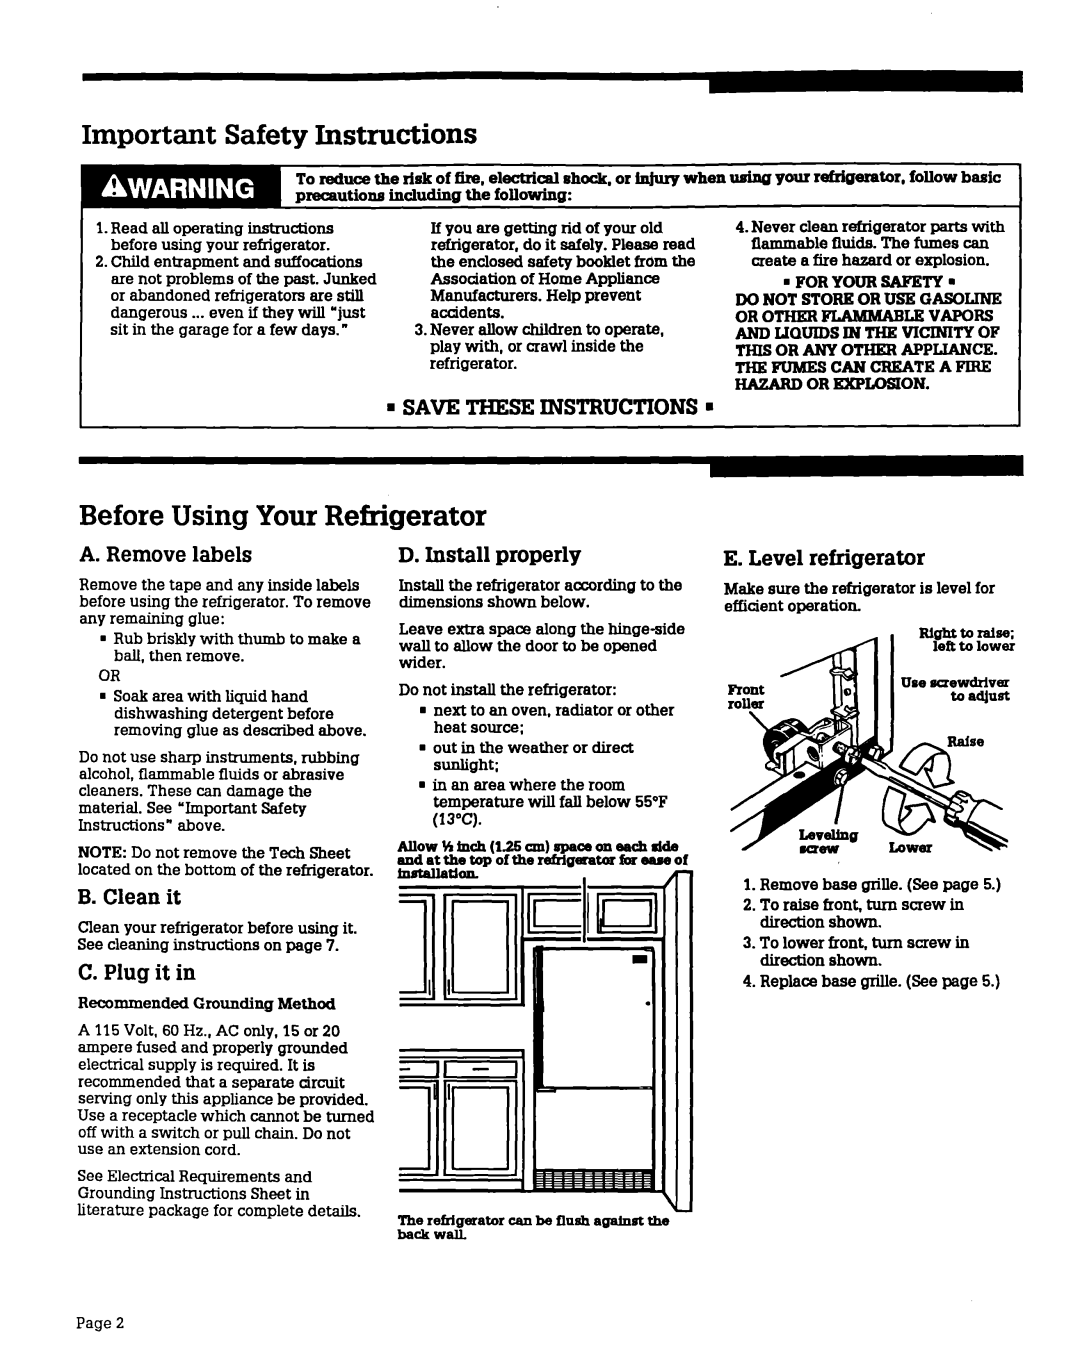 Whirlpool RB22CK Important Safety Instructions, Before Using Your Refrigerator, ’ Savetheseinstructions’, A. Removelabels 